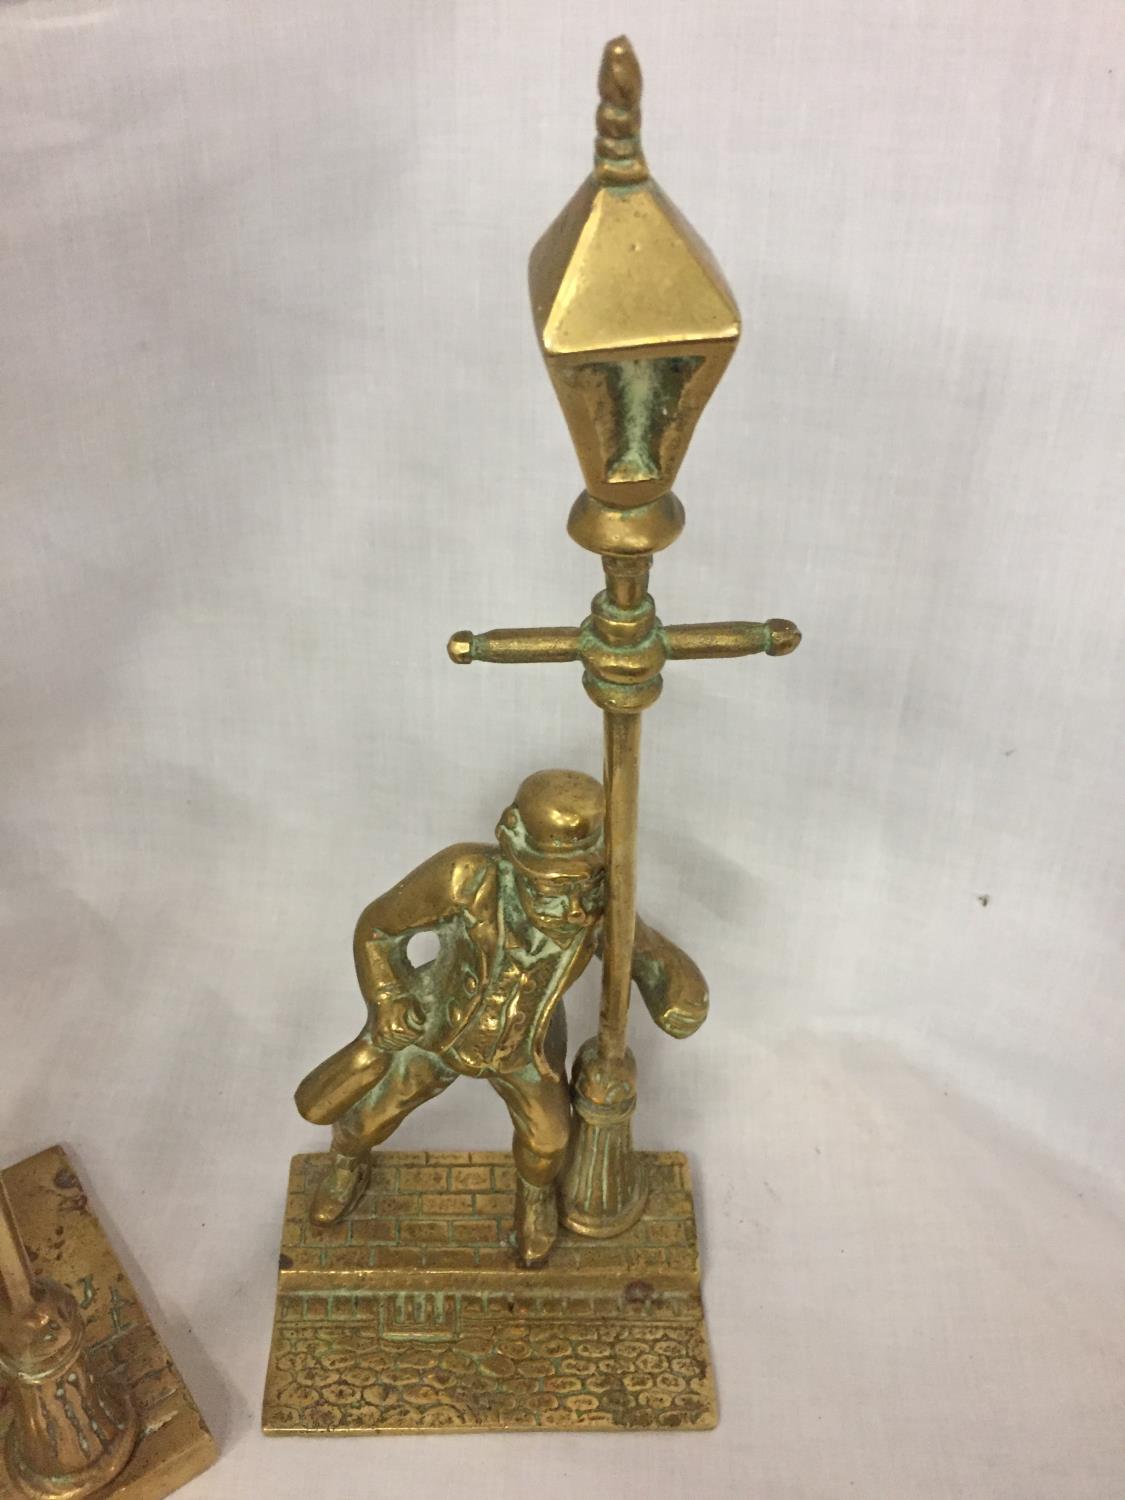 TWO BRASS FIGURES, ONE OF A STREETLAMP LIGHTER WITH DOG AND ONE OF A DRUNKEN MAN - Image 4 of 5